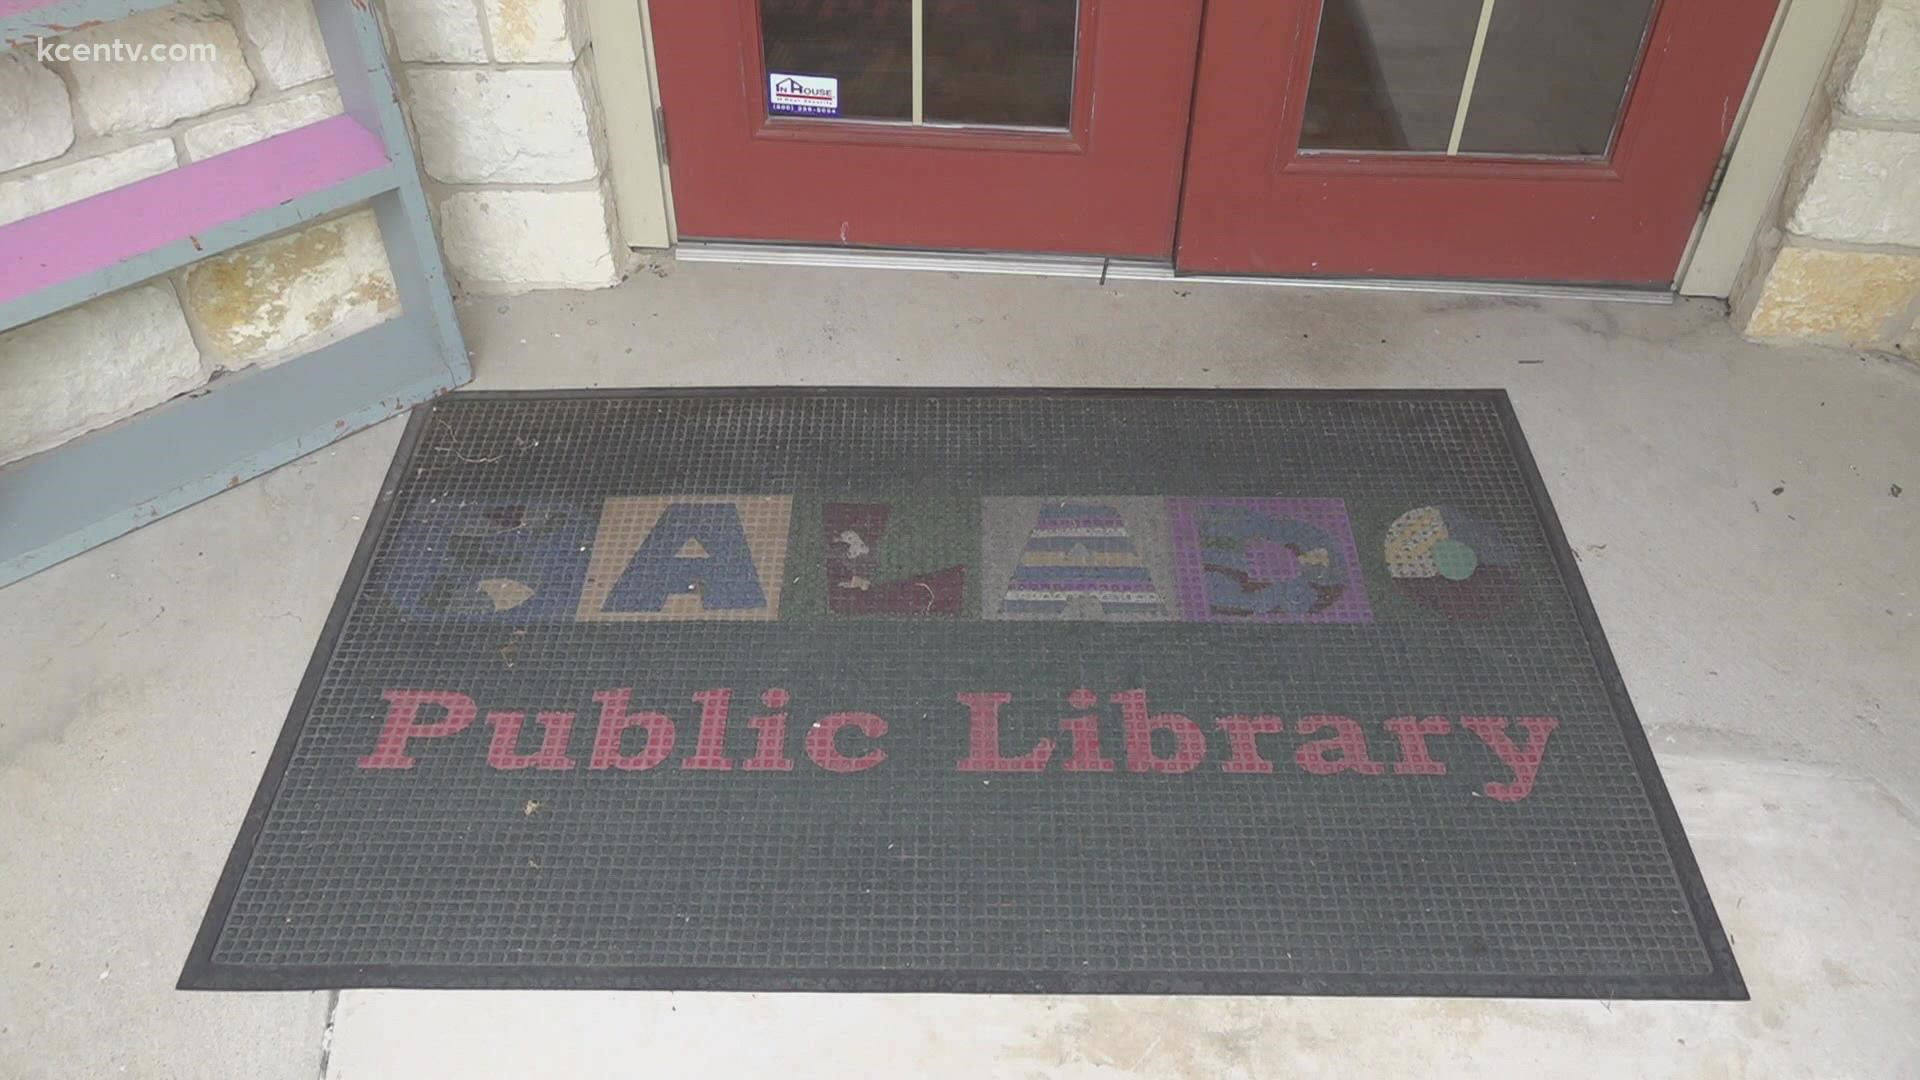 The day after the tornado hit, the Salado Public Library offered to collect everything found and get it back to the rightful owners.